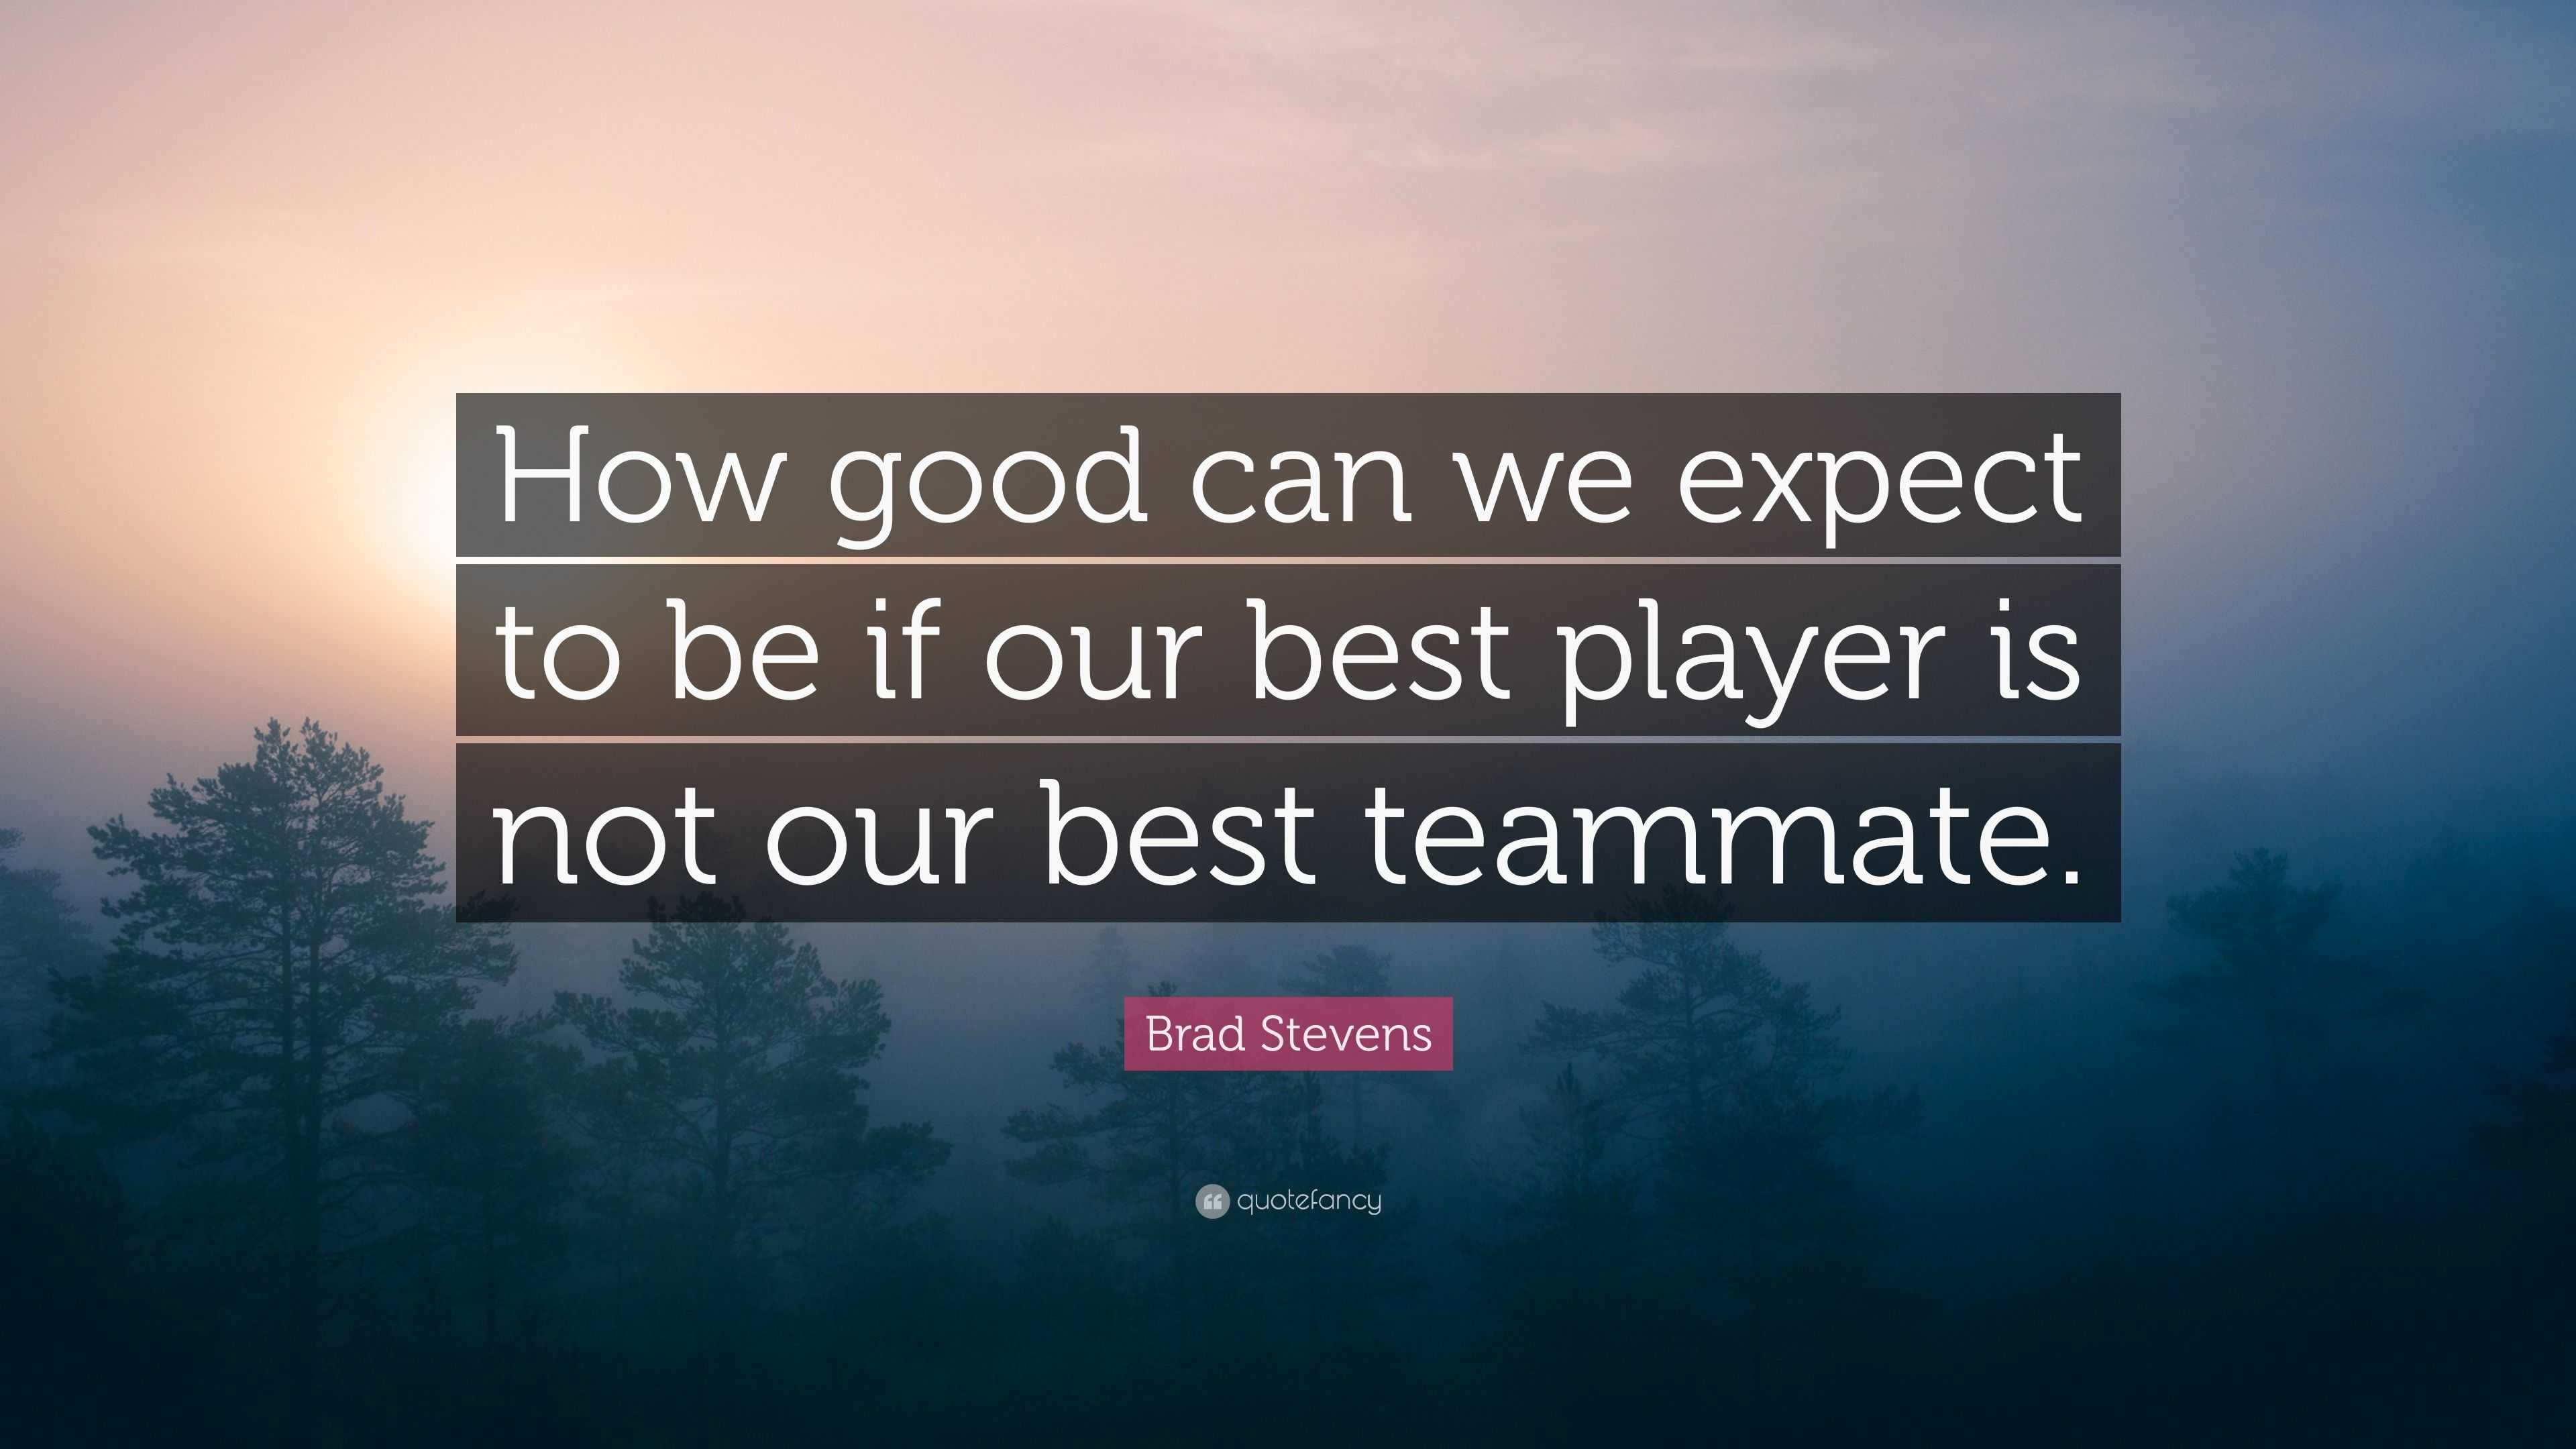 Brad Stevens Quote: “How good can we expect to be if our best player is ...